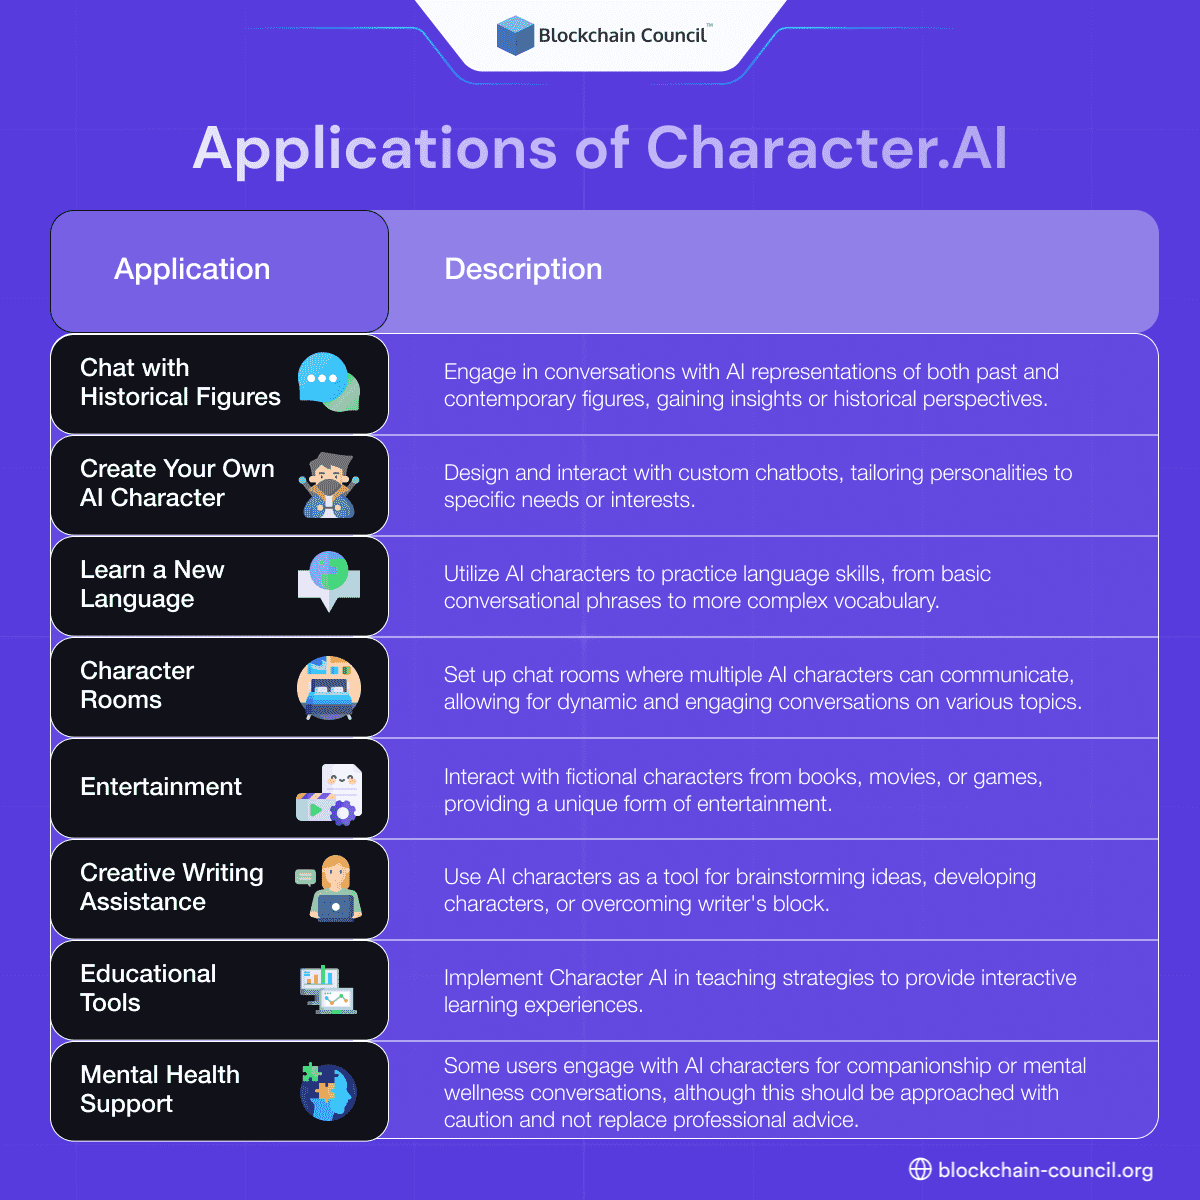 Applications of Character.AI